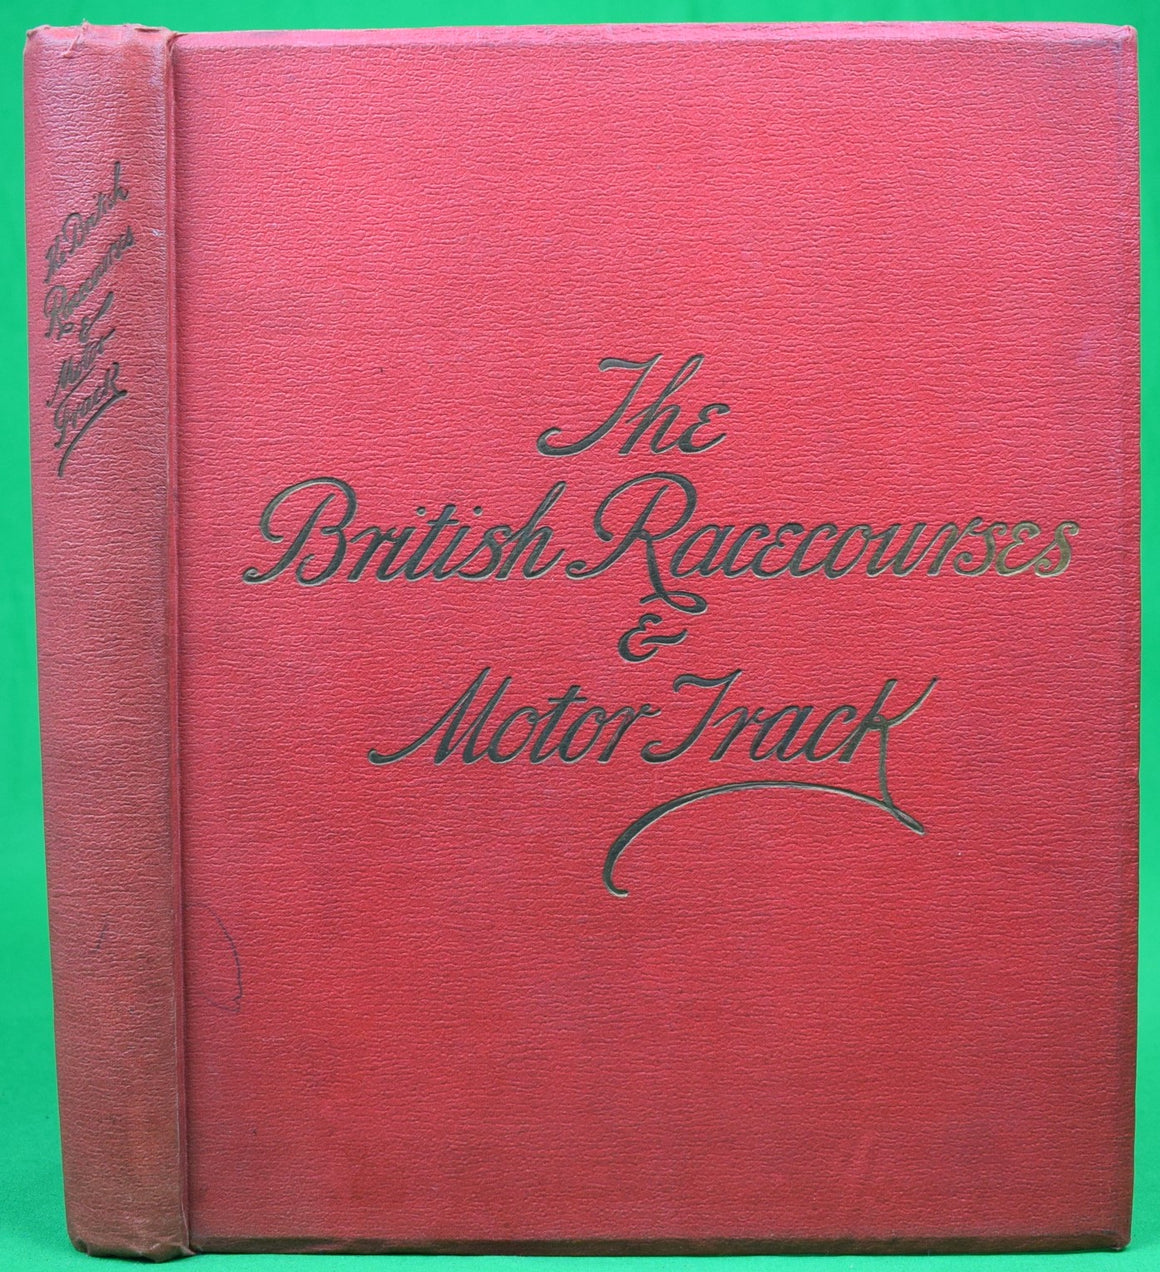 "The British Race Courses Of Great Britain And Ireland" 1908 BAYLES, F.H.